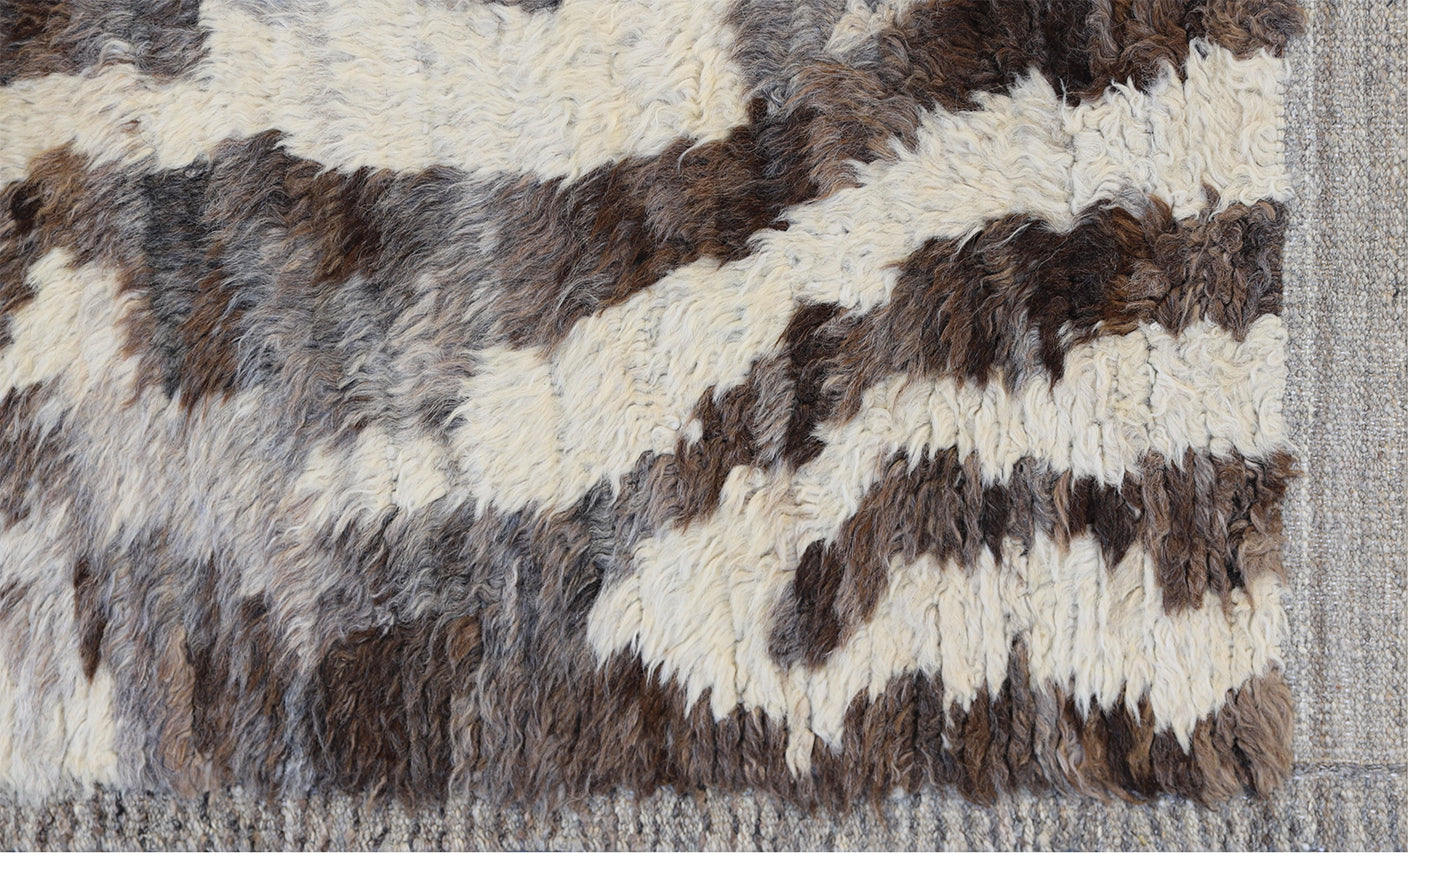 7'x10' Grey Brown White Abstract Animal Pattern Moroccan Style Shaggy Ariana Barchi Rug